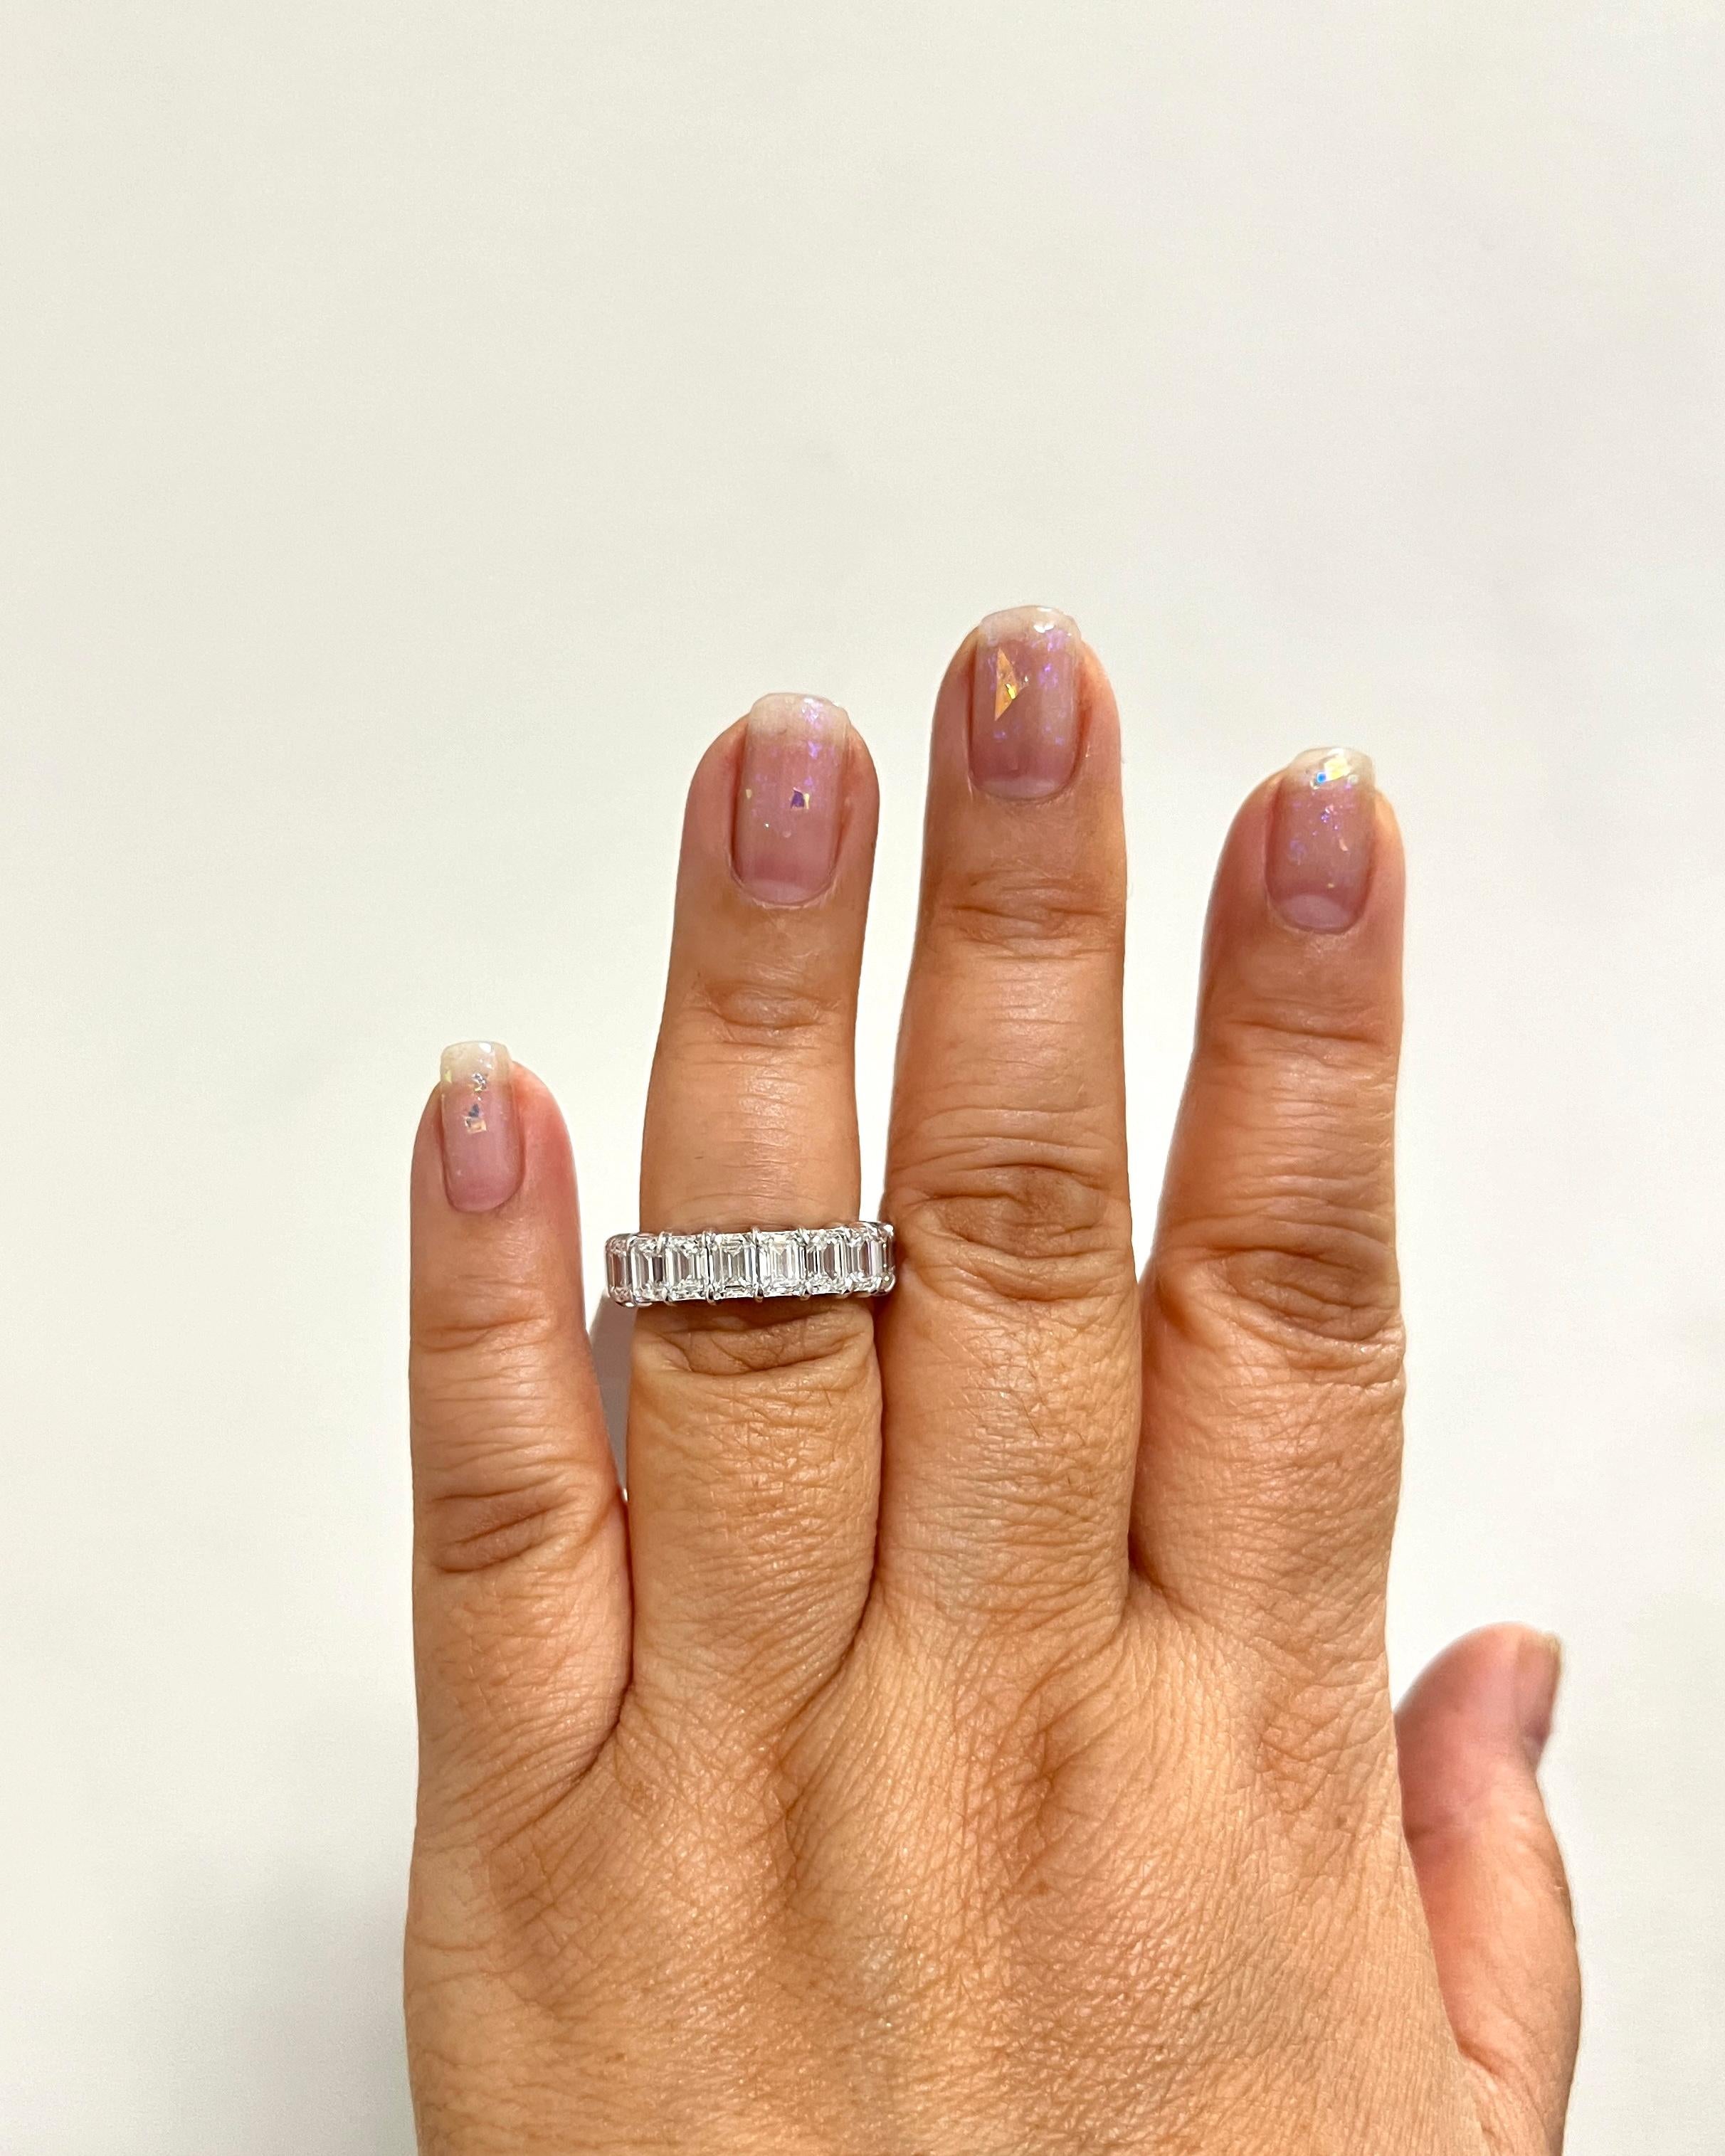 Gorgeous 7.71 ct. D IF emerald cut diamonds.  Total of 19 stones, 0.40 each.  Handmade in 18k white gold.  Ring size 7.5.  All stones have a GIA certificate that will be included.  Any size, stone, quality can be custom made.